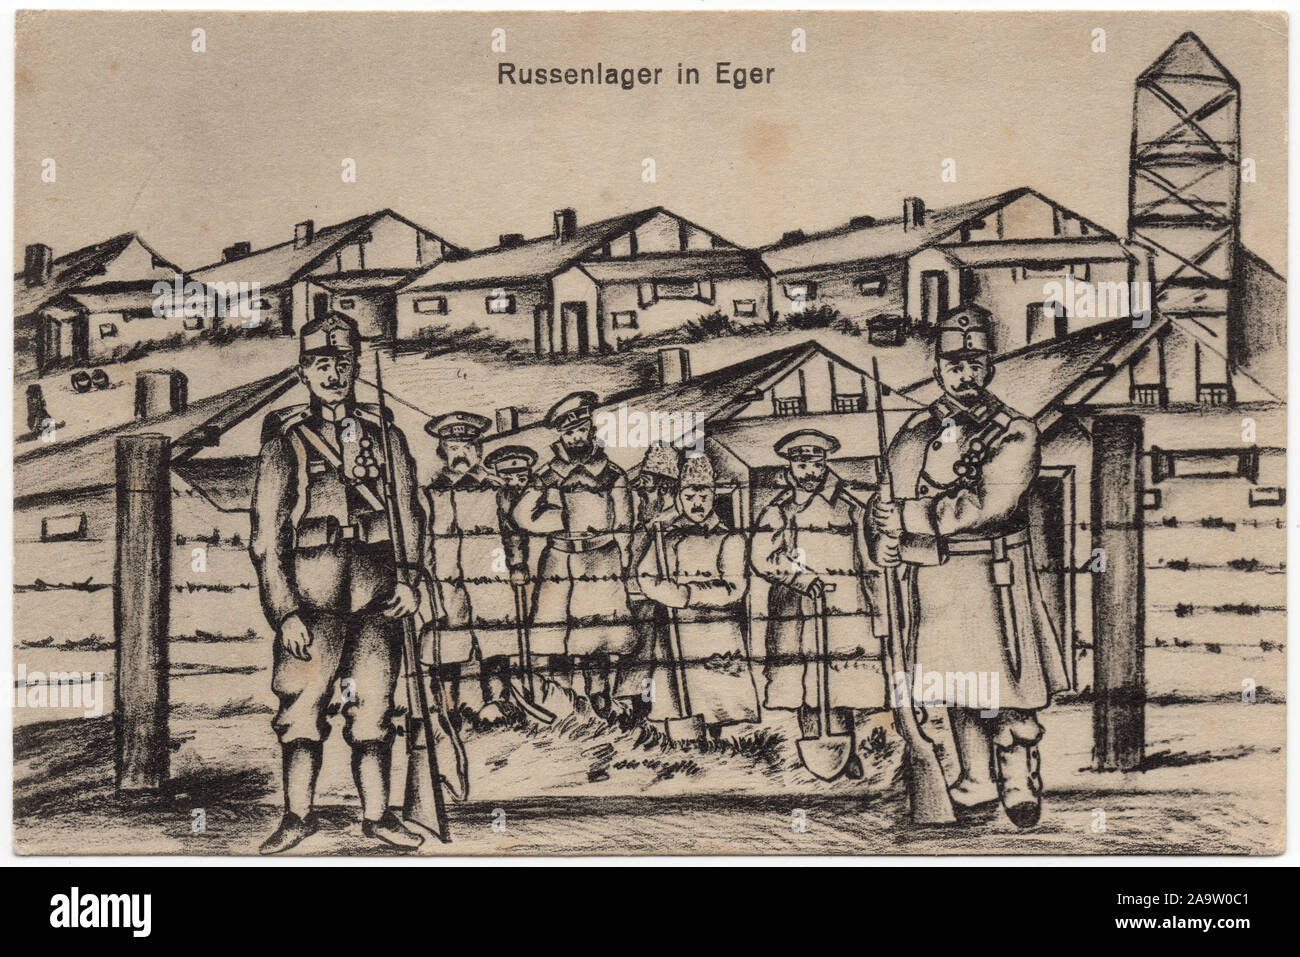 Russian prisoners of war in the Austro-Hungarian POW Camp of Eger (now Cheb in West Bohemia, Czech Republic) during the First World War depicted in the undated drawing by an unknown artist, probably by one of the Russian prisoners, and published in the vintage postcard issued by local publisher Johann Russ issued probably in 1918. Courtesy of the Azoor Postcard Collection. Stock Photo